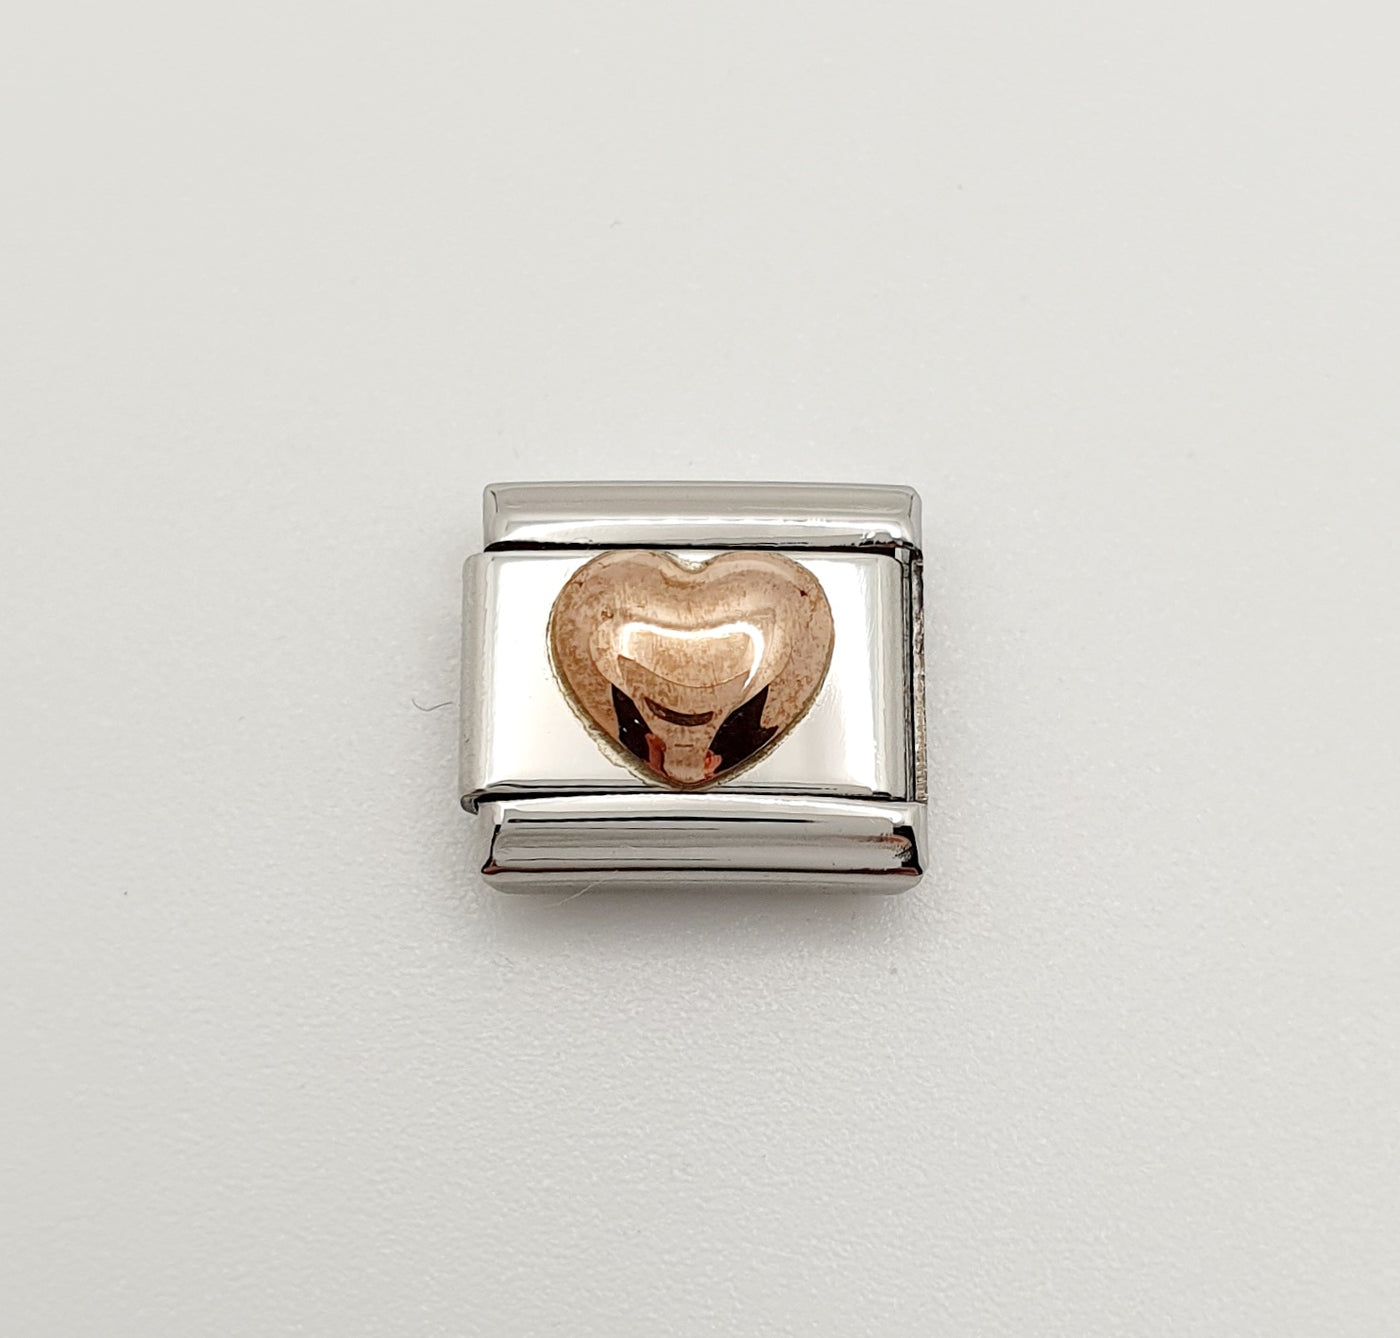 Nomination Charm Link "Raised Heart" Stainless Steel with 9k Rose Gold, 430104 22